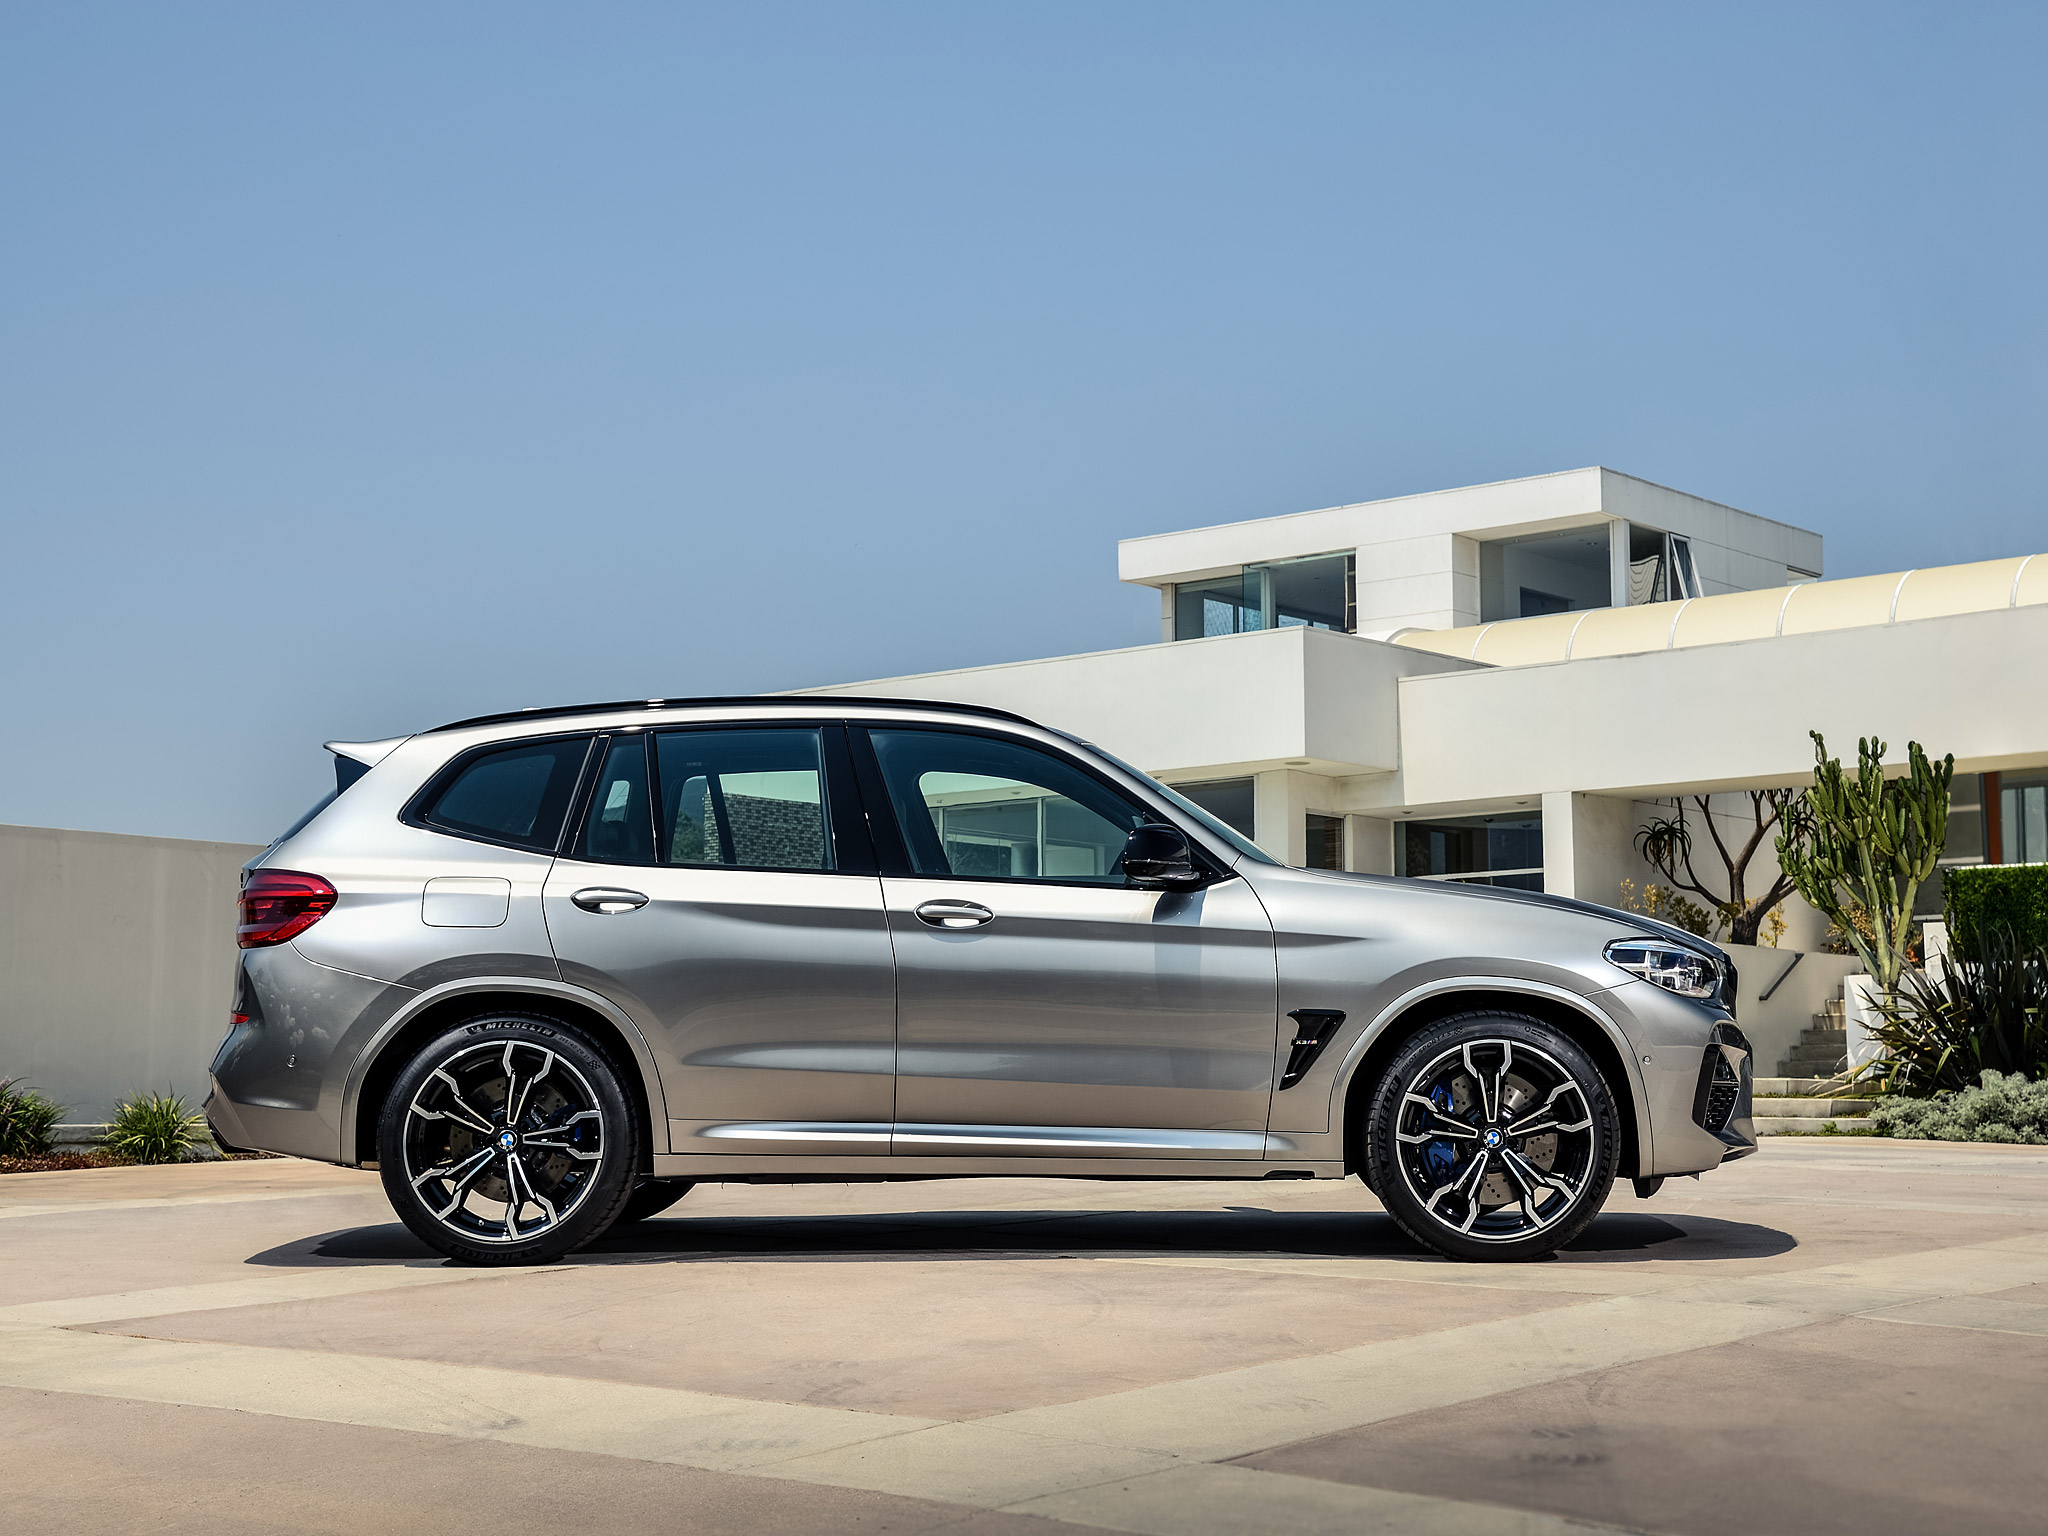  2020 BMW X3 M Competition Wallpaper.